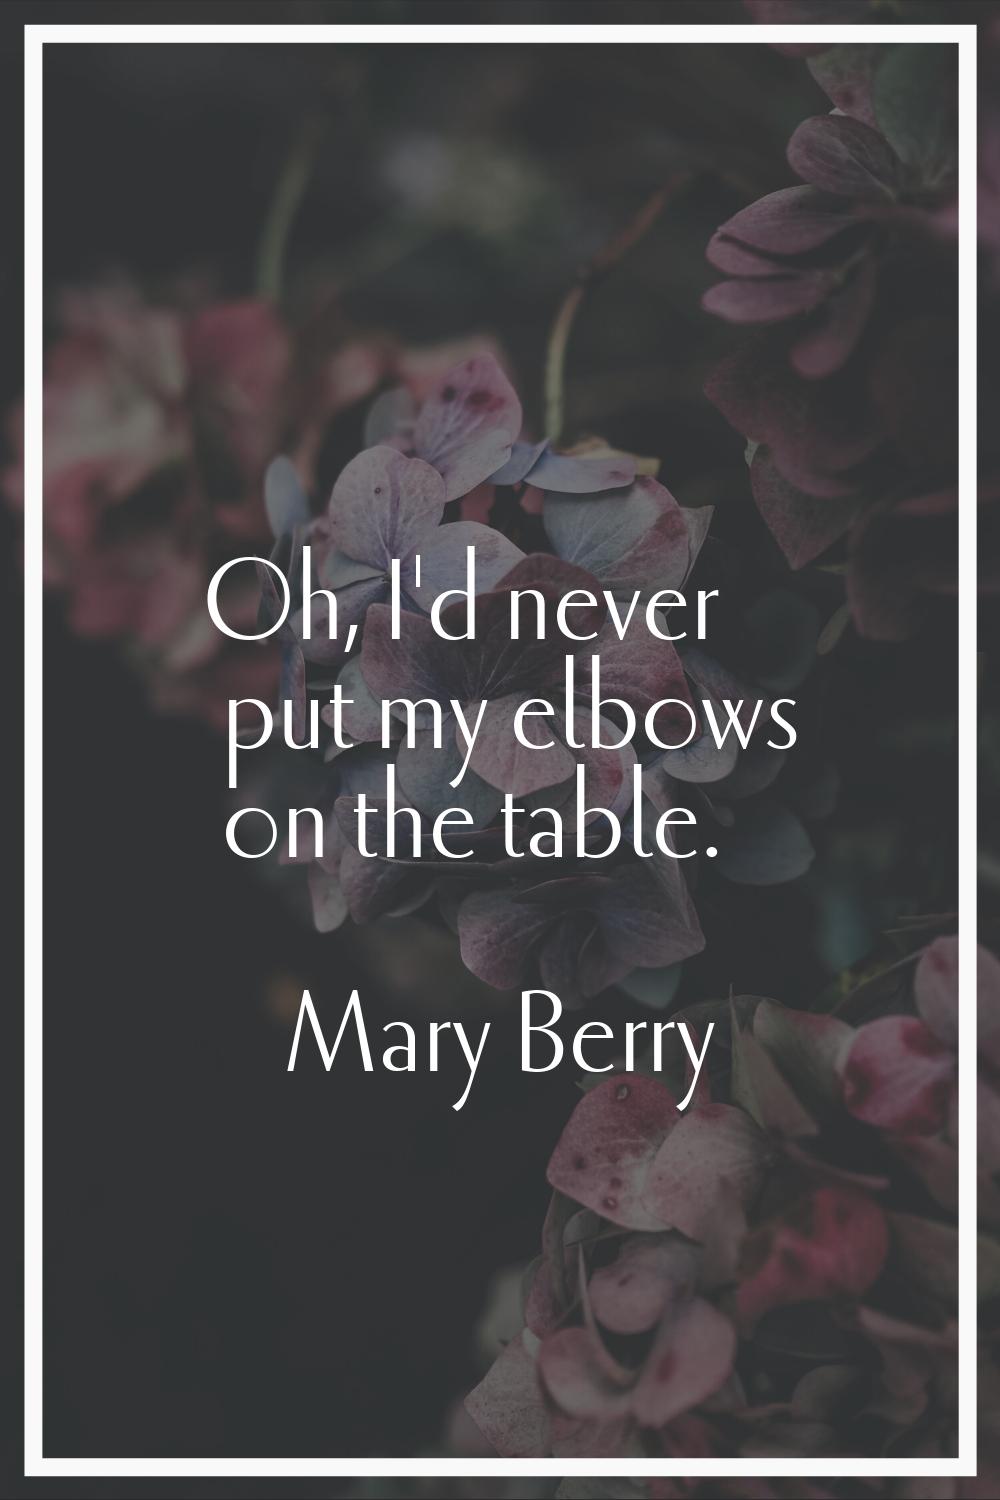 Oh, I'd never put my elbows on the table.